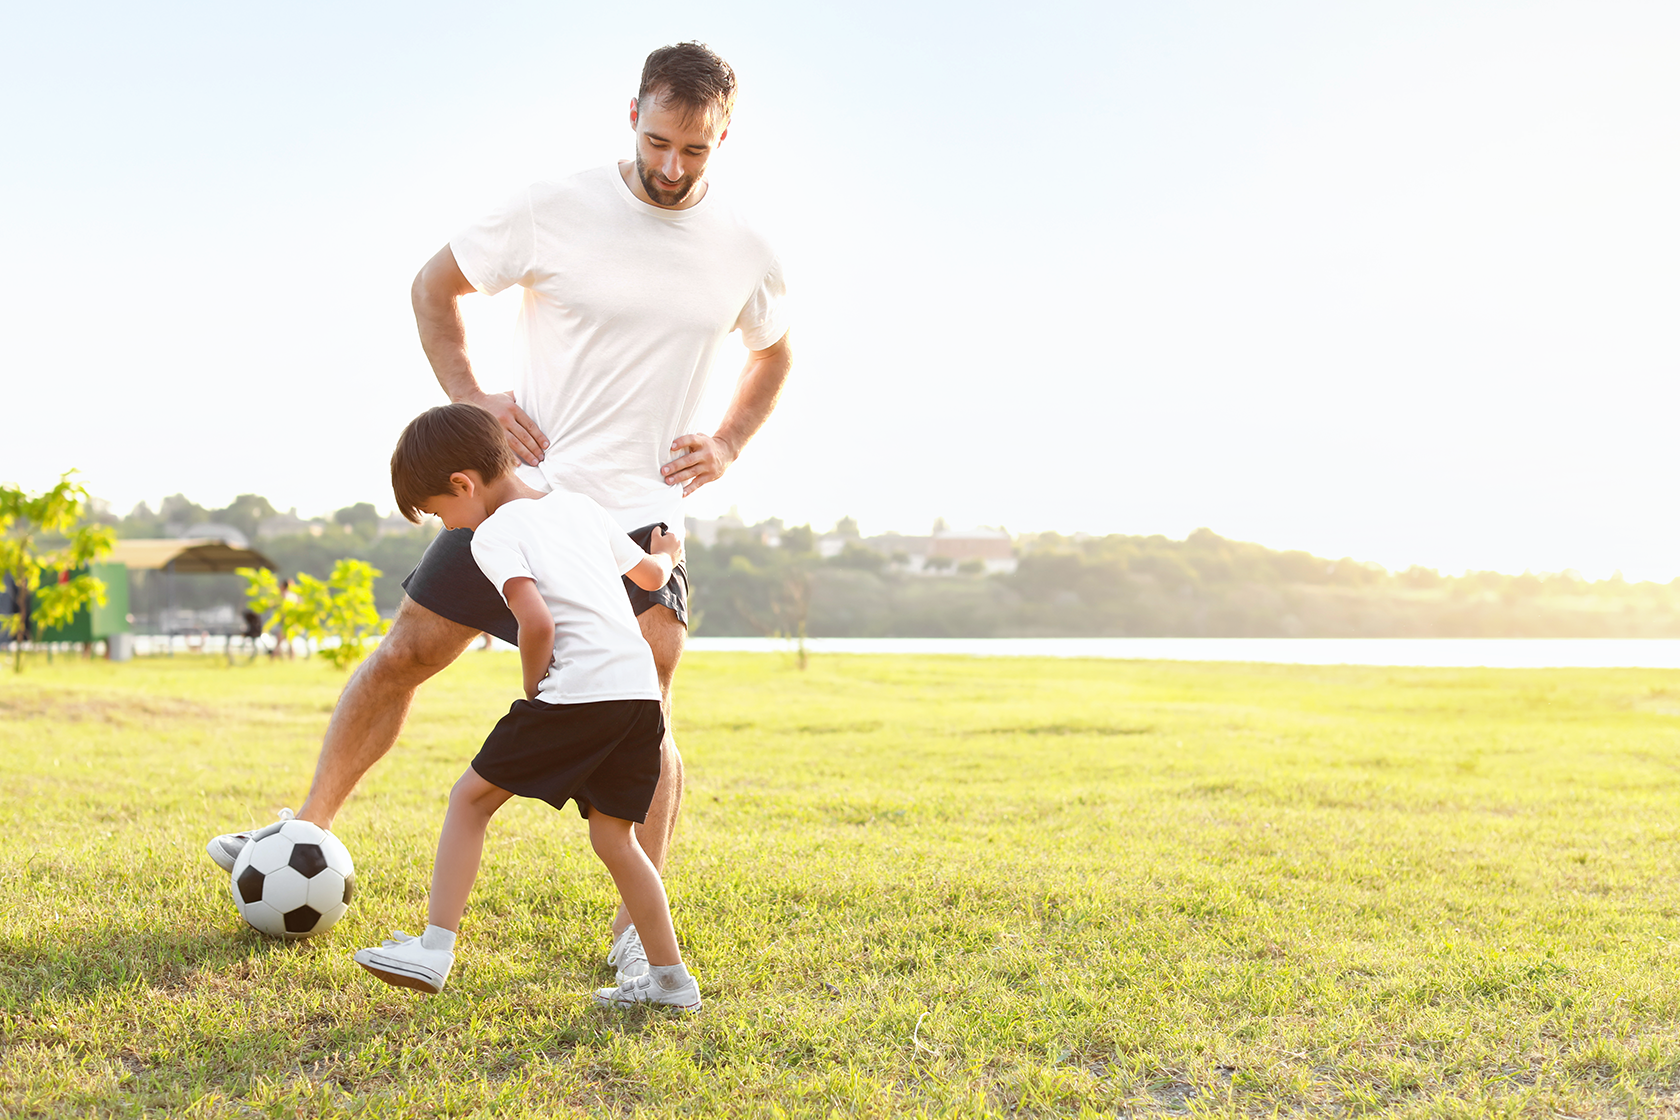 Father and young son play soccer in the sun. Sport Psychology services can help parents deliver life affirming sport experiences for their children. Click image to learn more.